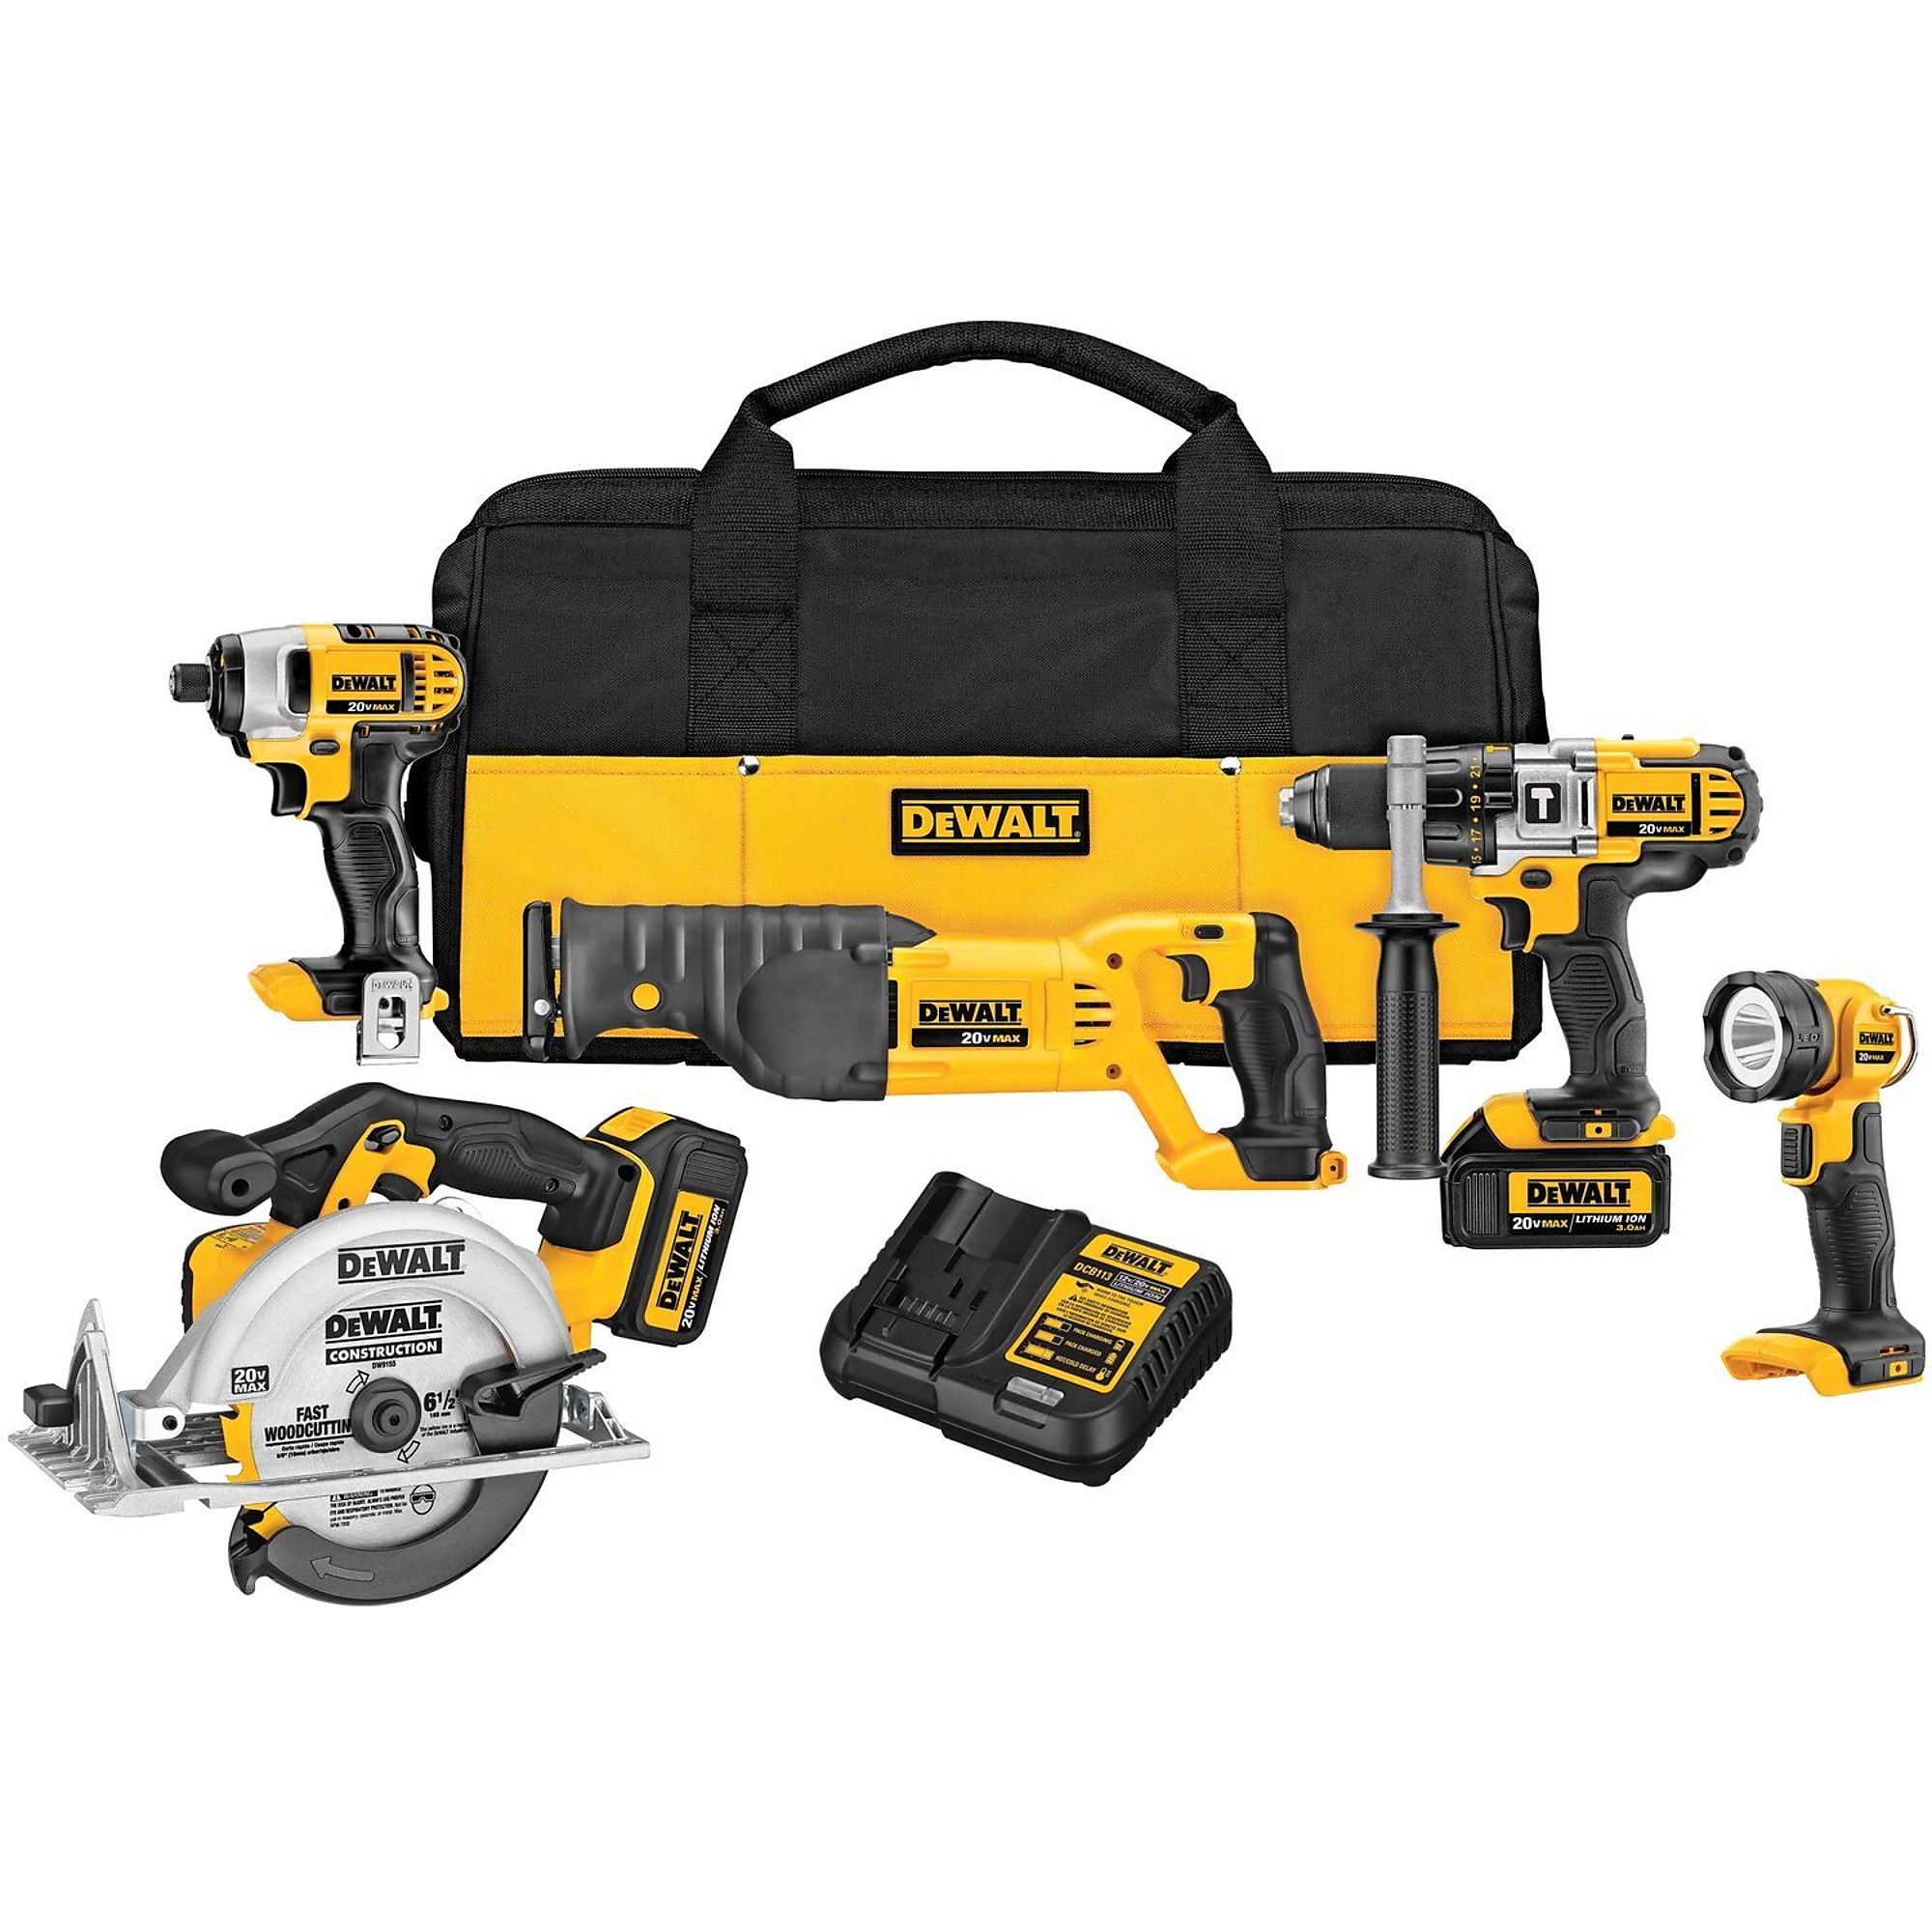 DEWALT, 20V MAX* Cordless Power Tool 5-Kit, Chuck Size 1/2 in, Drive Size 1/4 in, Tools Included (qty.) 5 Model DCK592L2